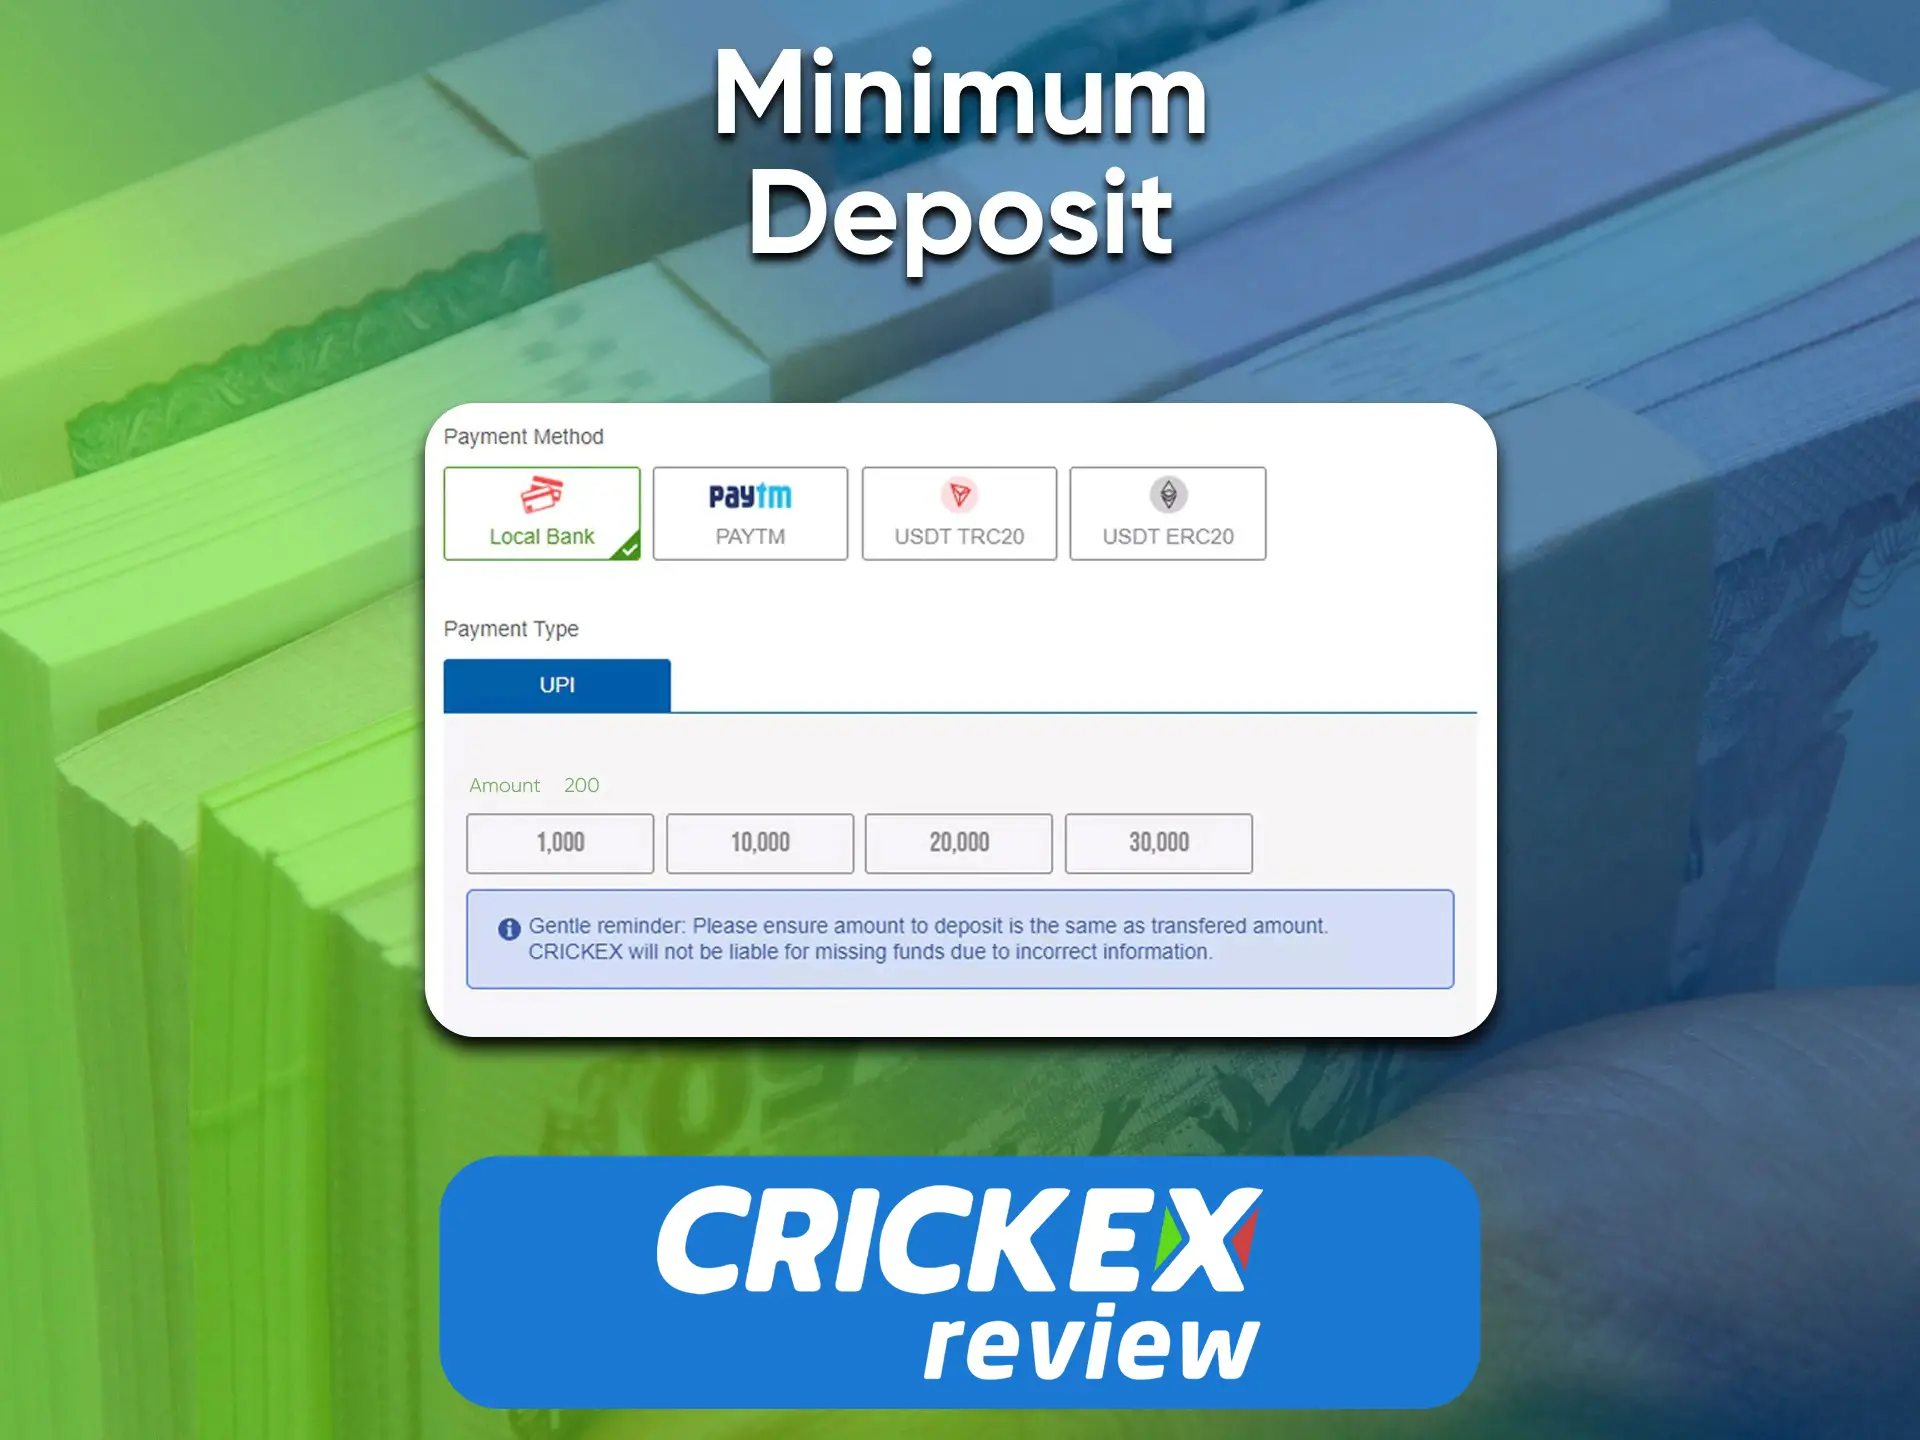 On the Crickex service, there are restrictions on the minimum amount of account replenishment.